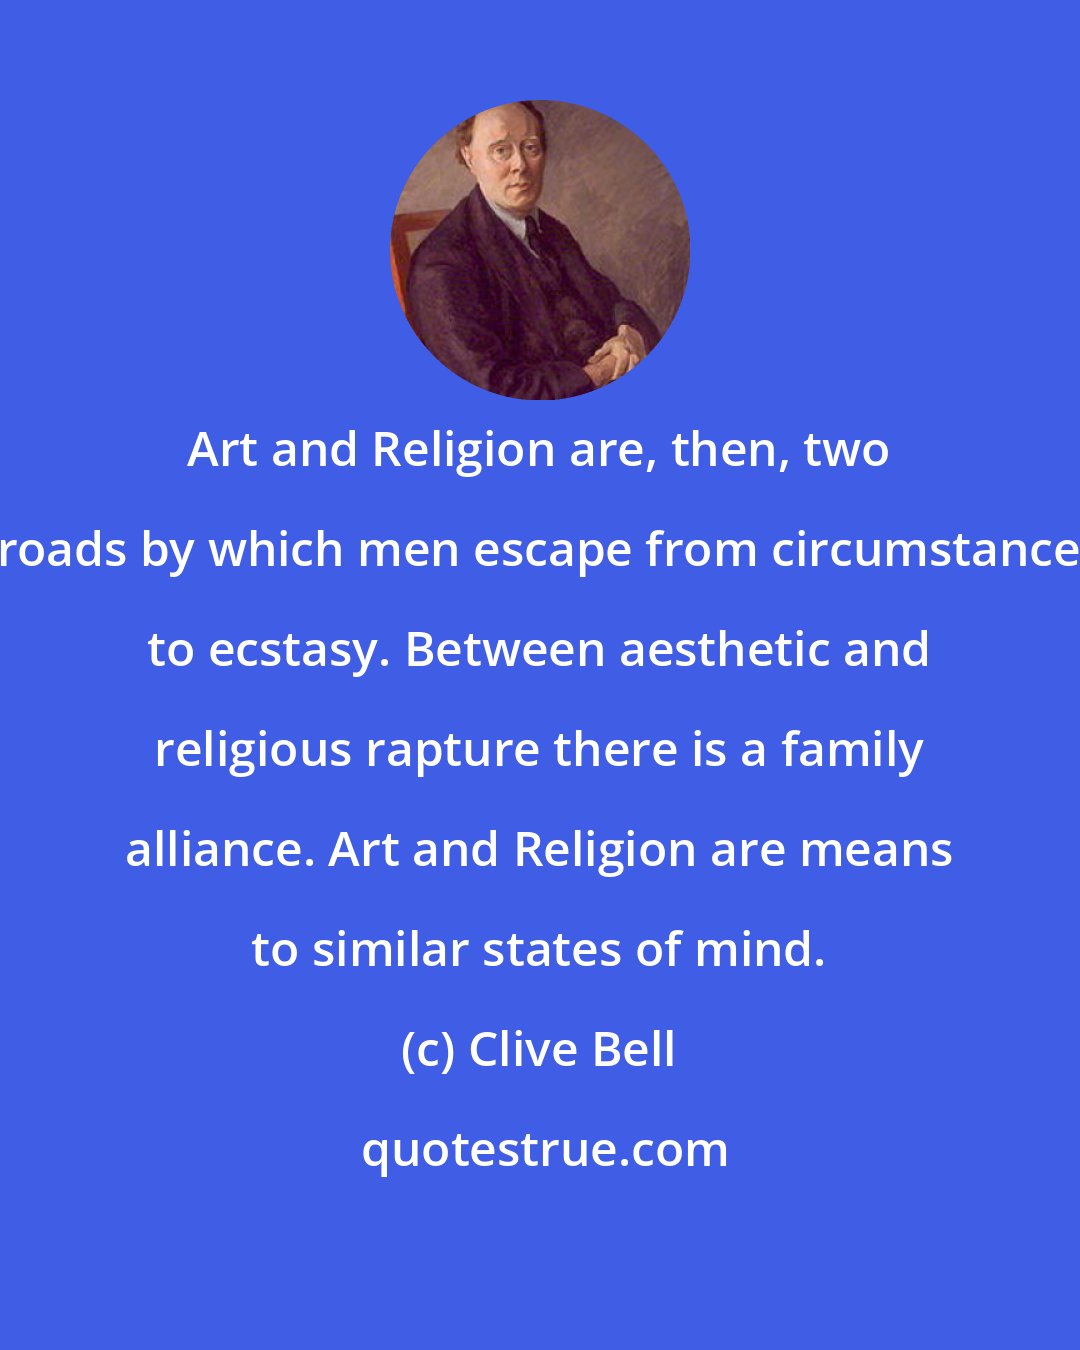 Clive Bell: Art and Religion are, then, two roads by which men escape from circumstance to ecstasy. Between aesthetic and religious rapture there is a family alliance. Art and Religion are means to similar states of mind.